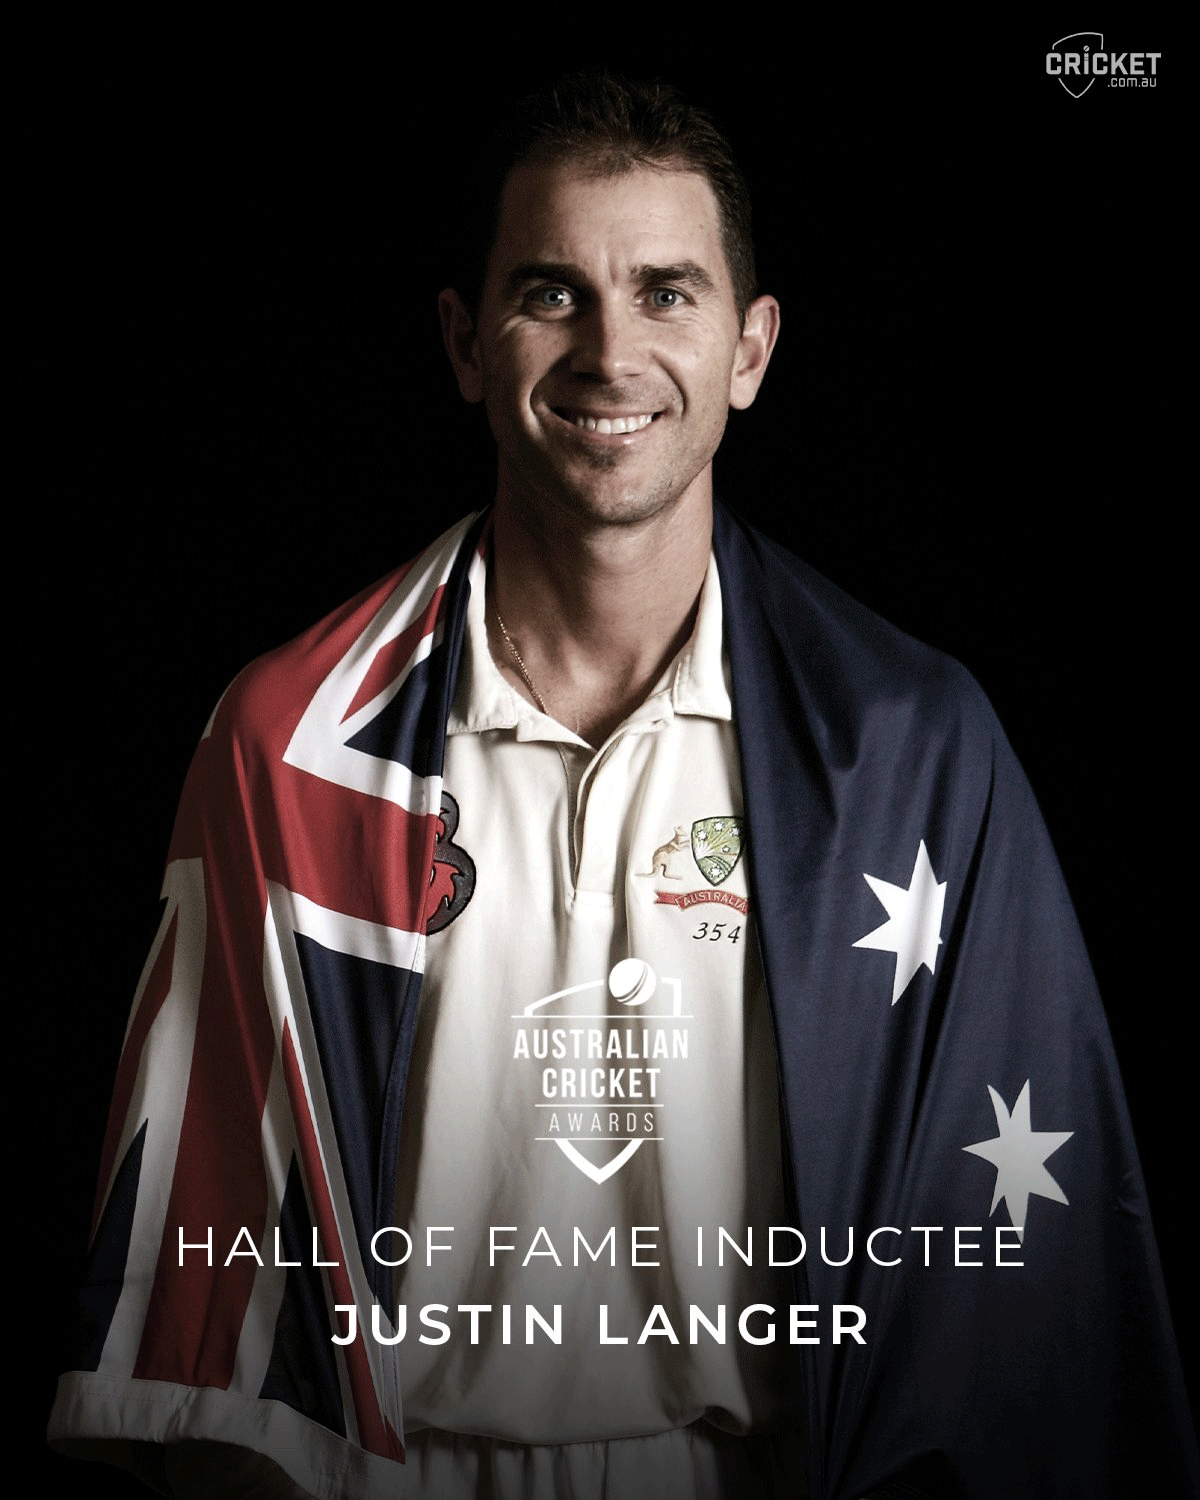 Justin The gritty Langer made his Test debut against the West Indies at the Adelaide Oval in 1993 with a gritty 54, an innings during which he was hit on the helmet by an Ian Bishop delivery. The 51-year-old Langer finished his career with 7696 runs at an average of 45.27.